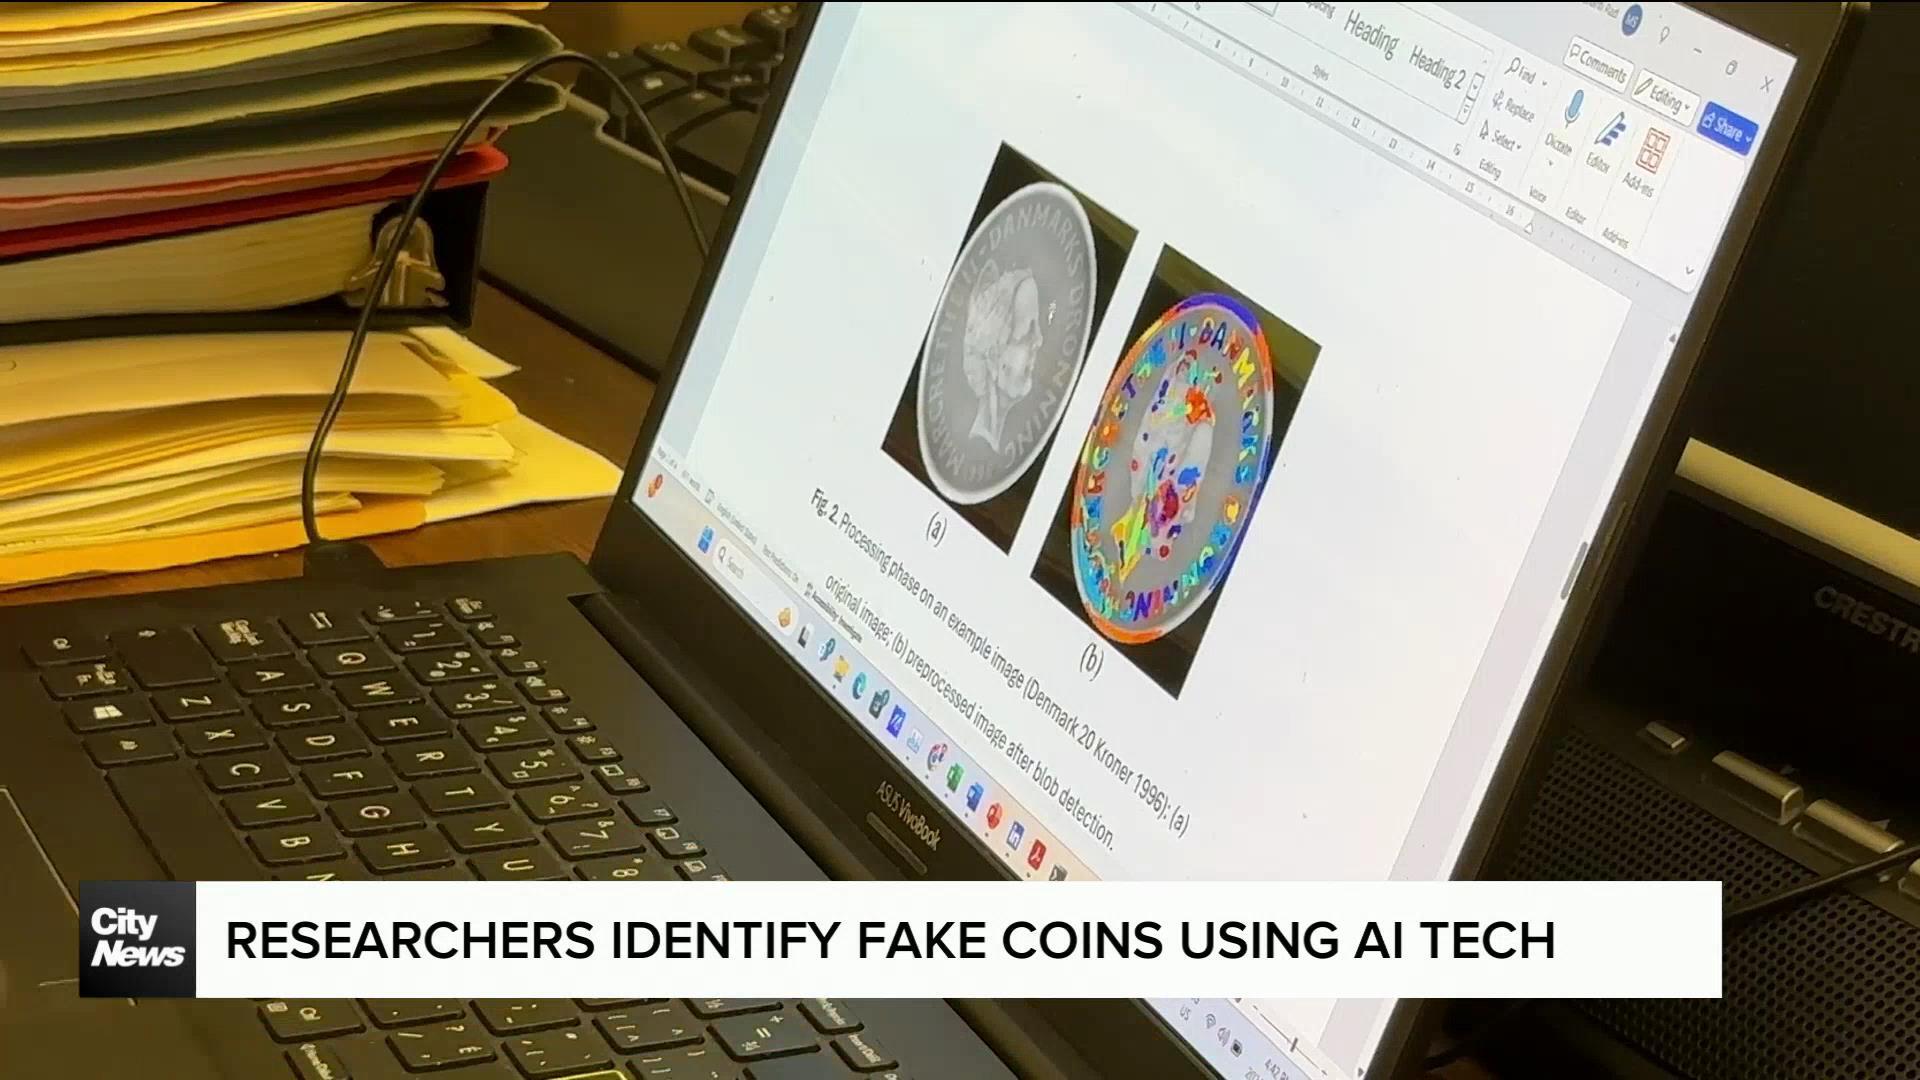 Concordia University researchers use AI to identify counterfeit coins